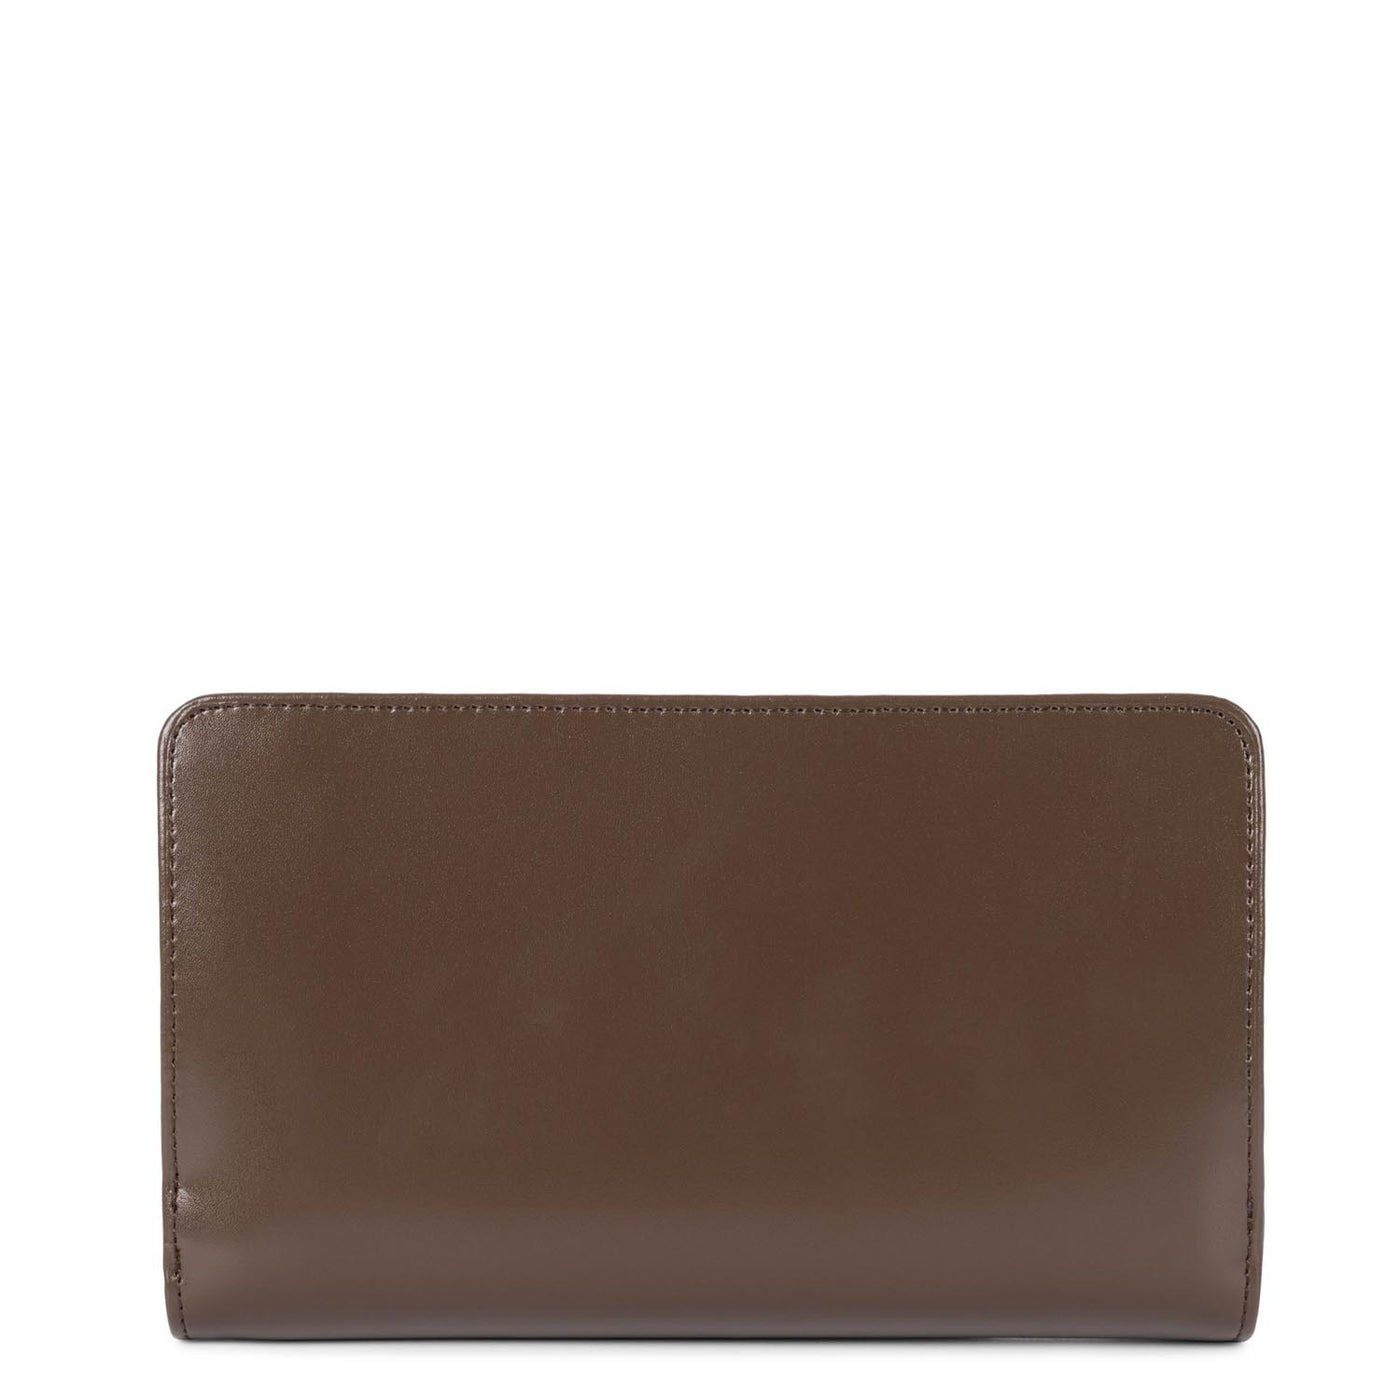 back to back organizer wallet - smooth #couleur_marron-rose-antic-nude